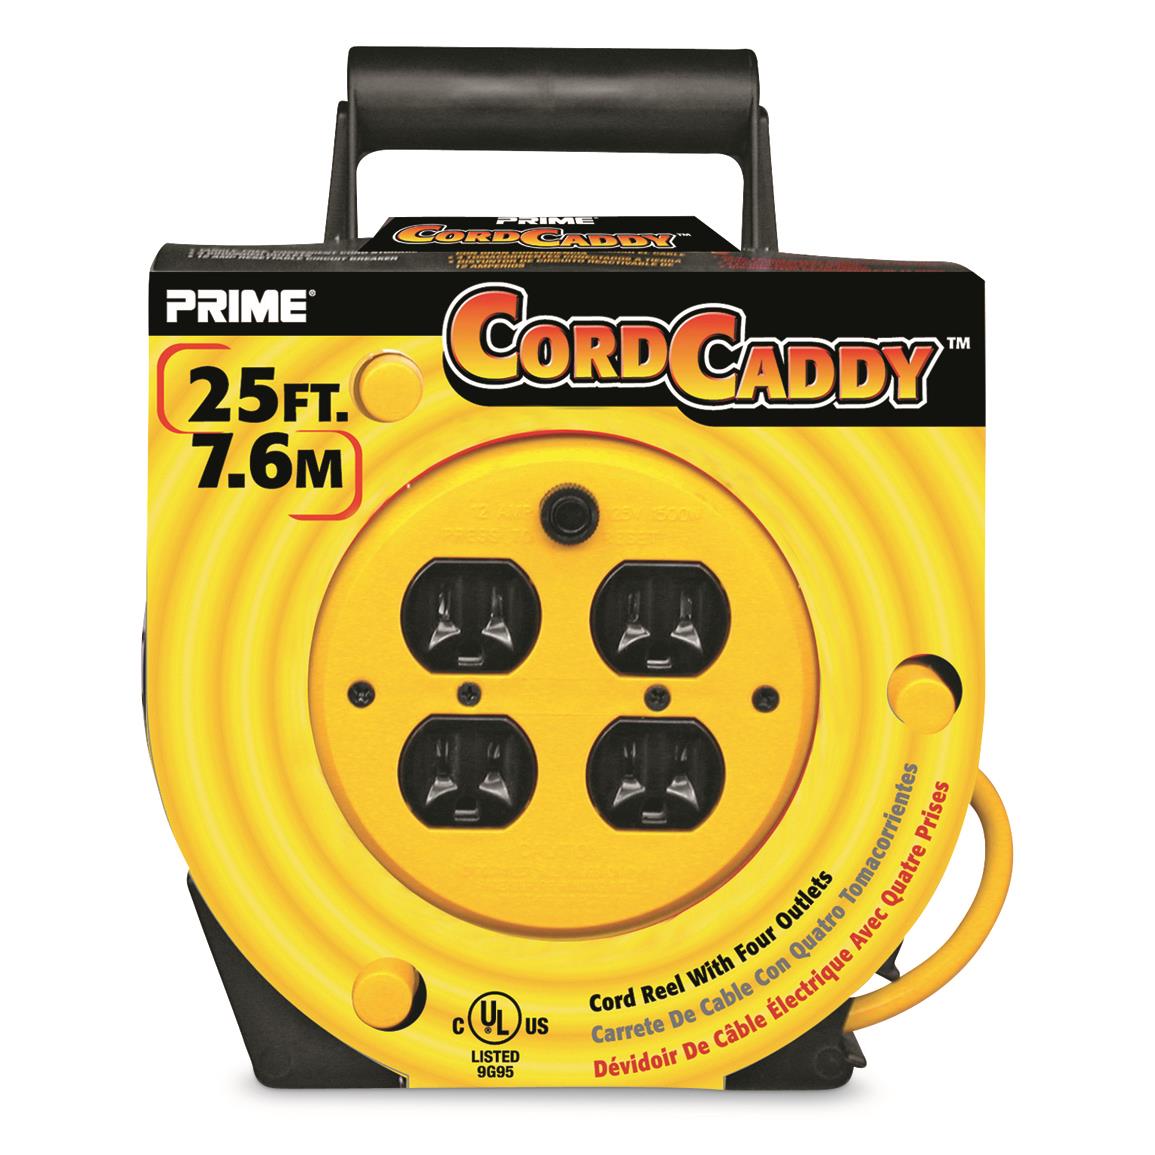 Prime 4-Outlet Portable Power Station with 25' Cord